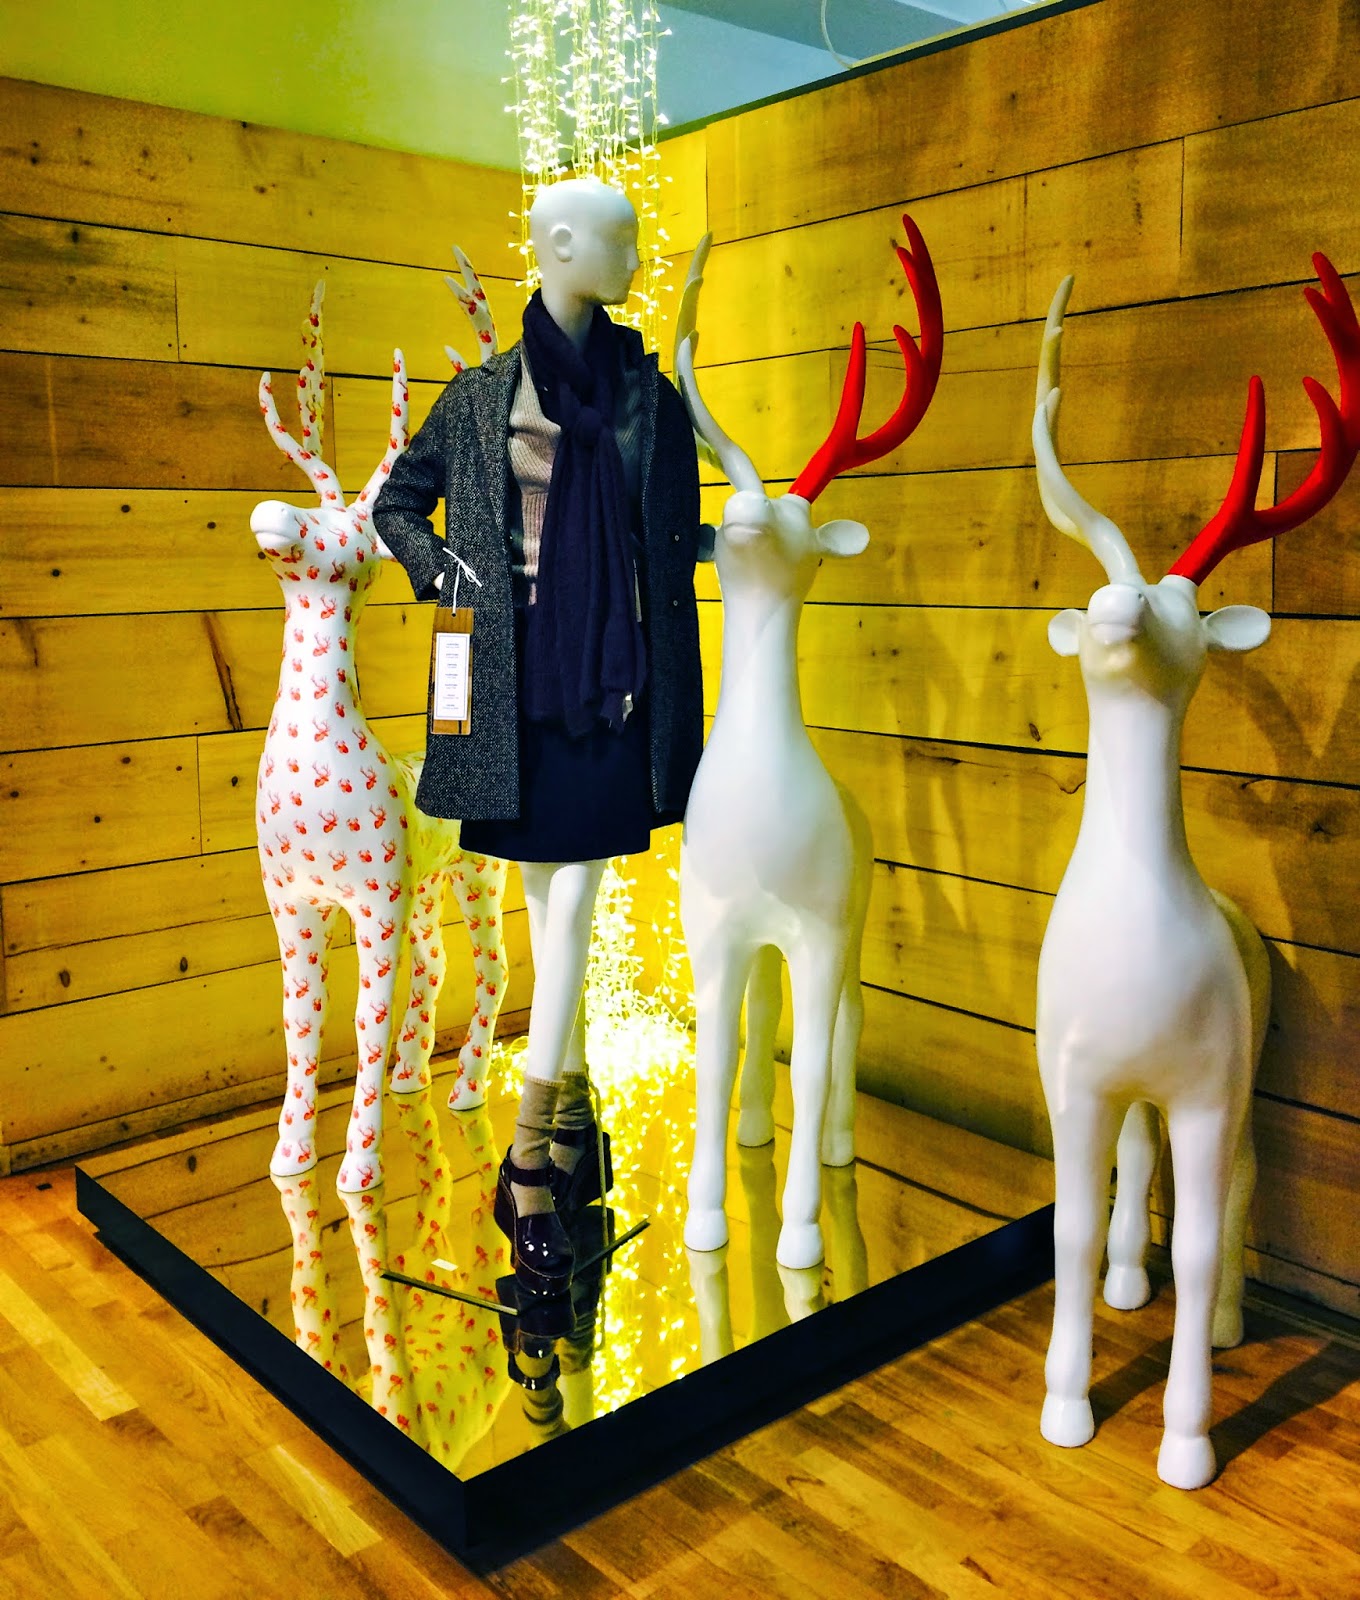 MesVitrinesNYC: The reindeers are at Bon Marché